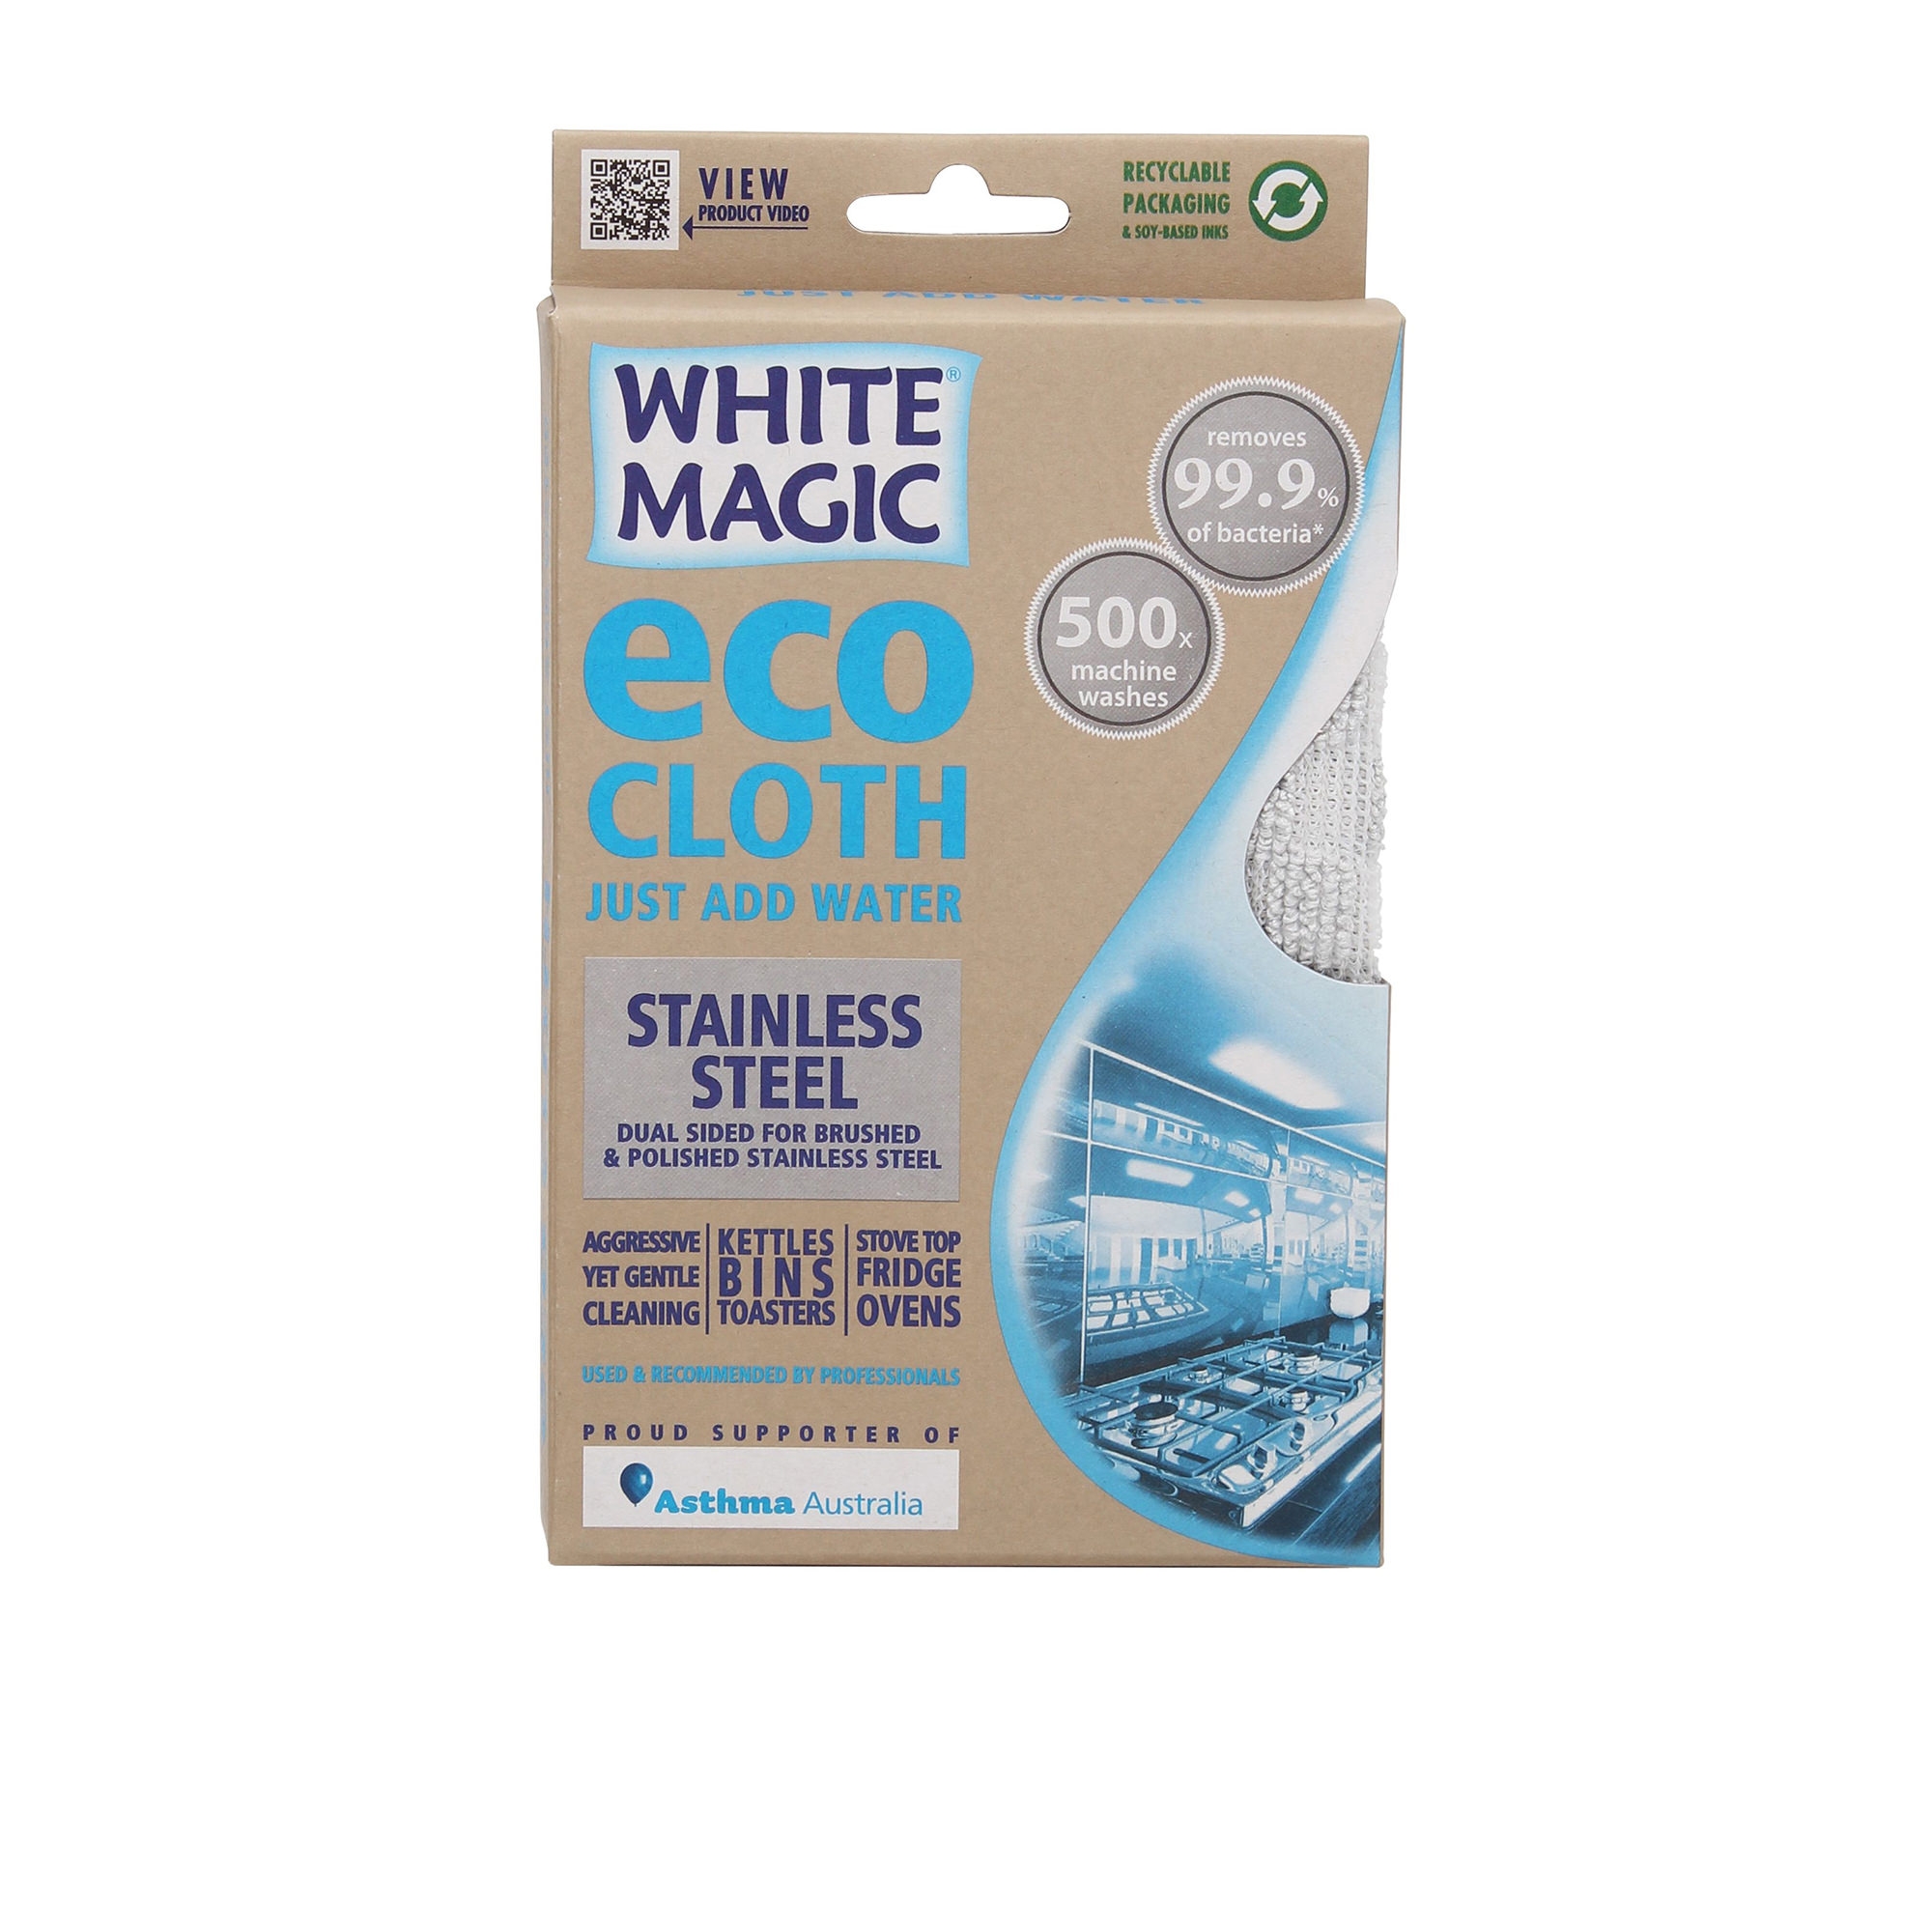 White Magic Eco Cloth Stainless Steel Image 2